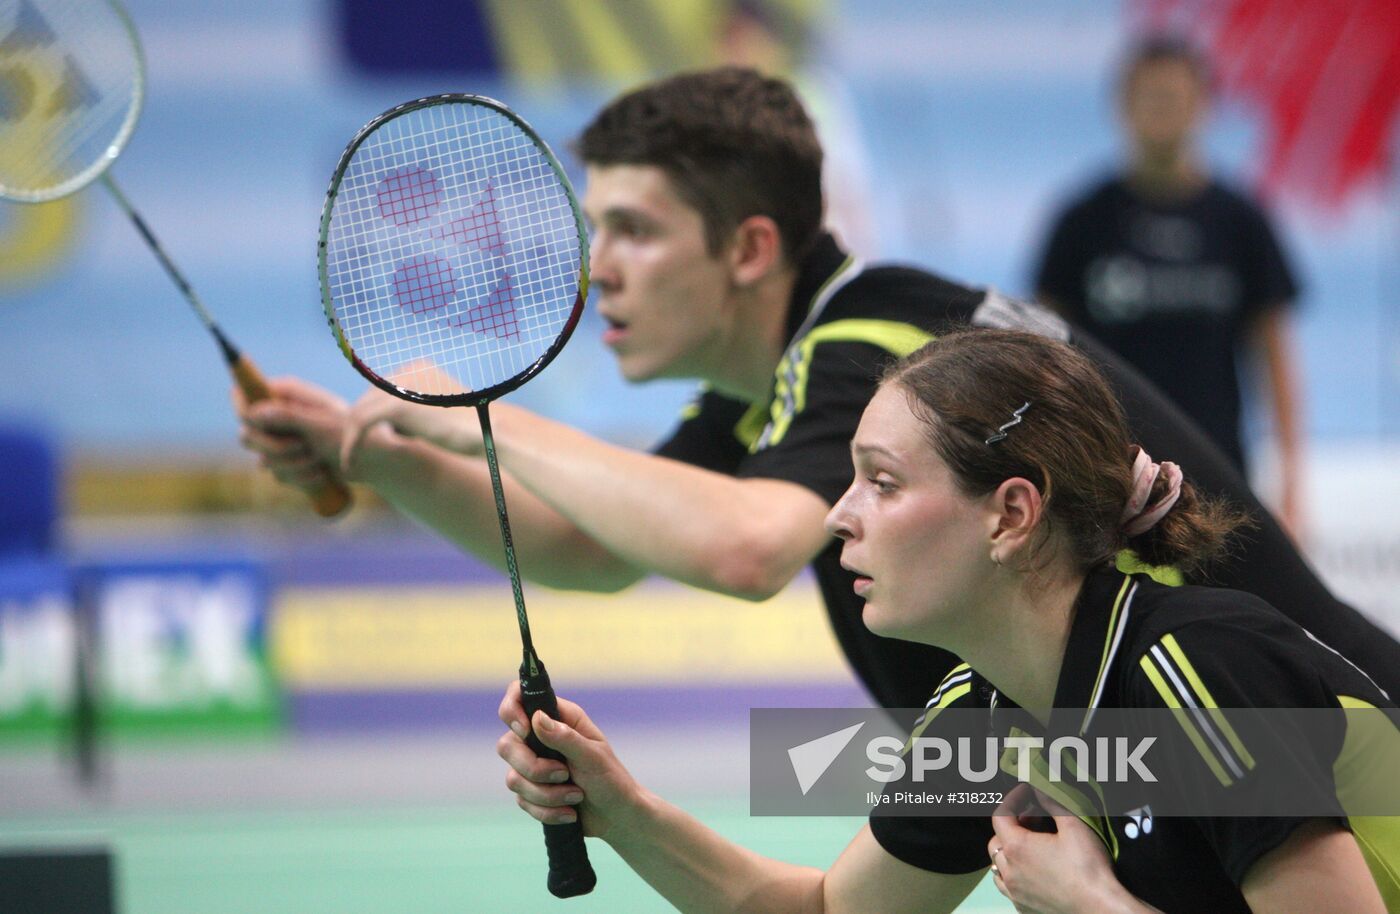 The Badminton Europe Cup